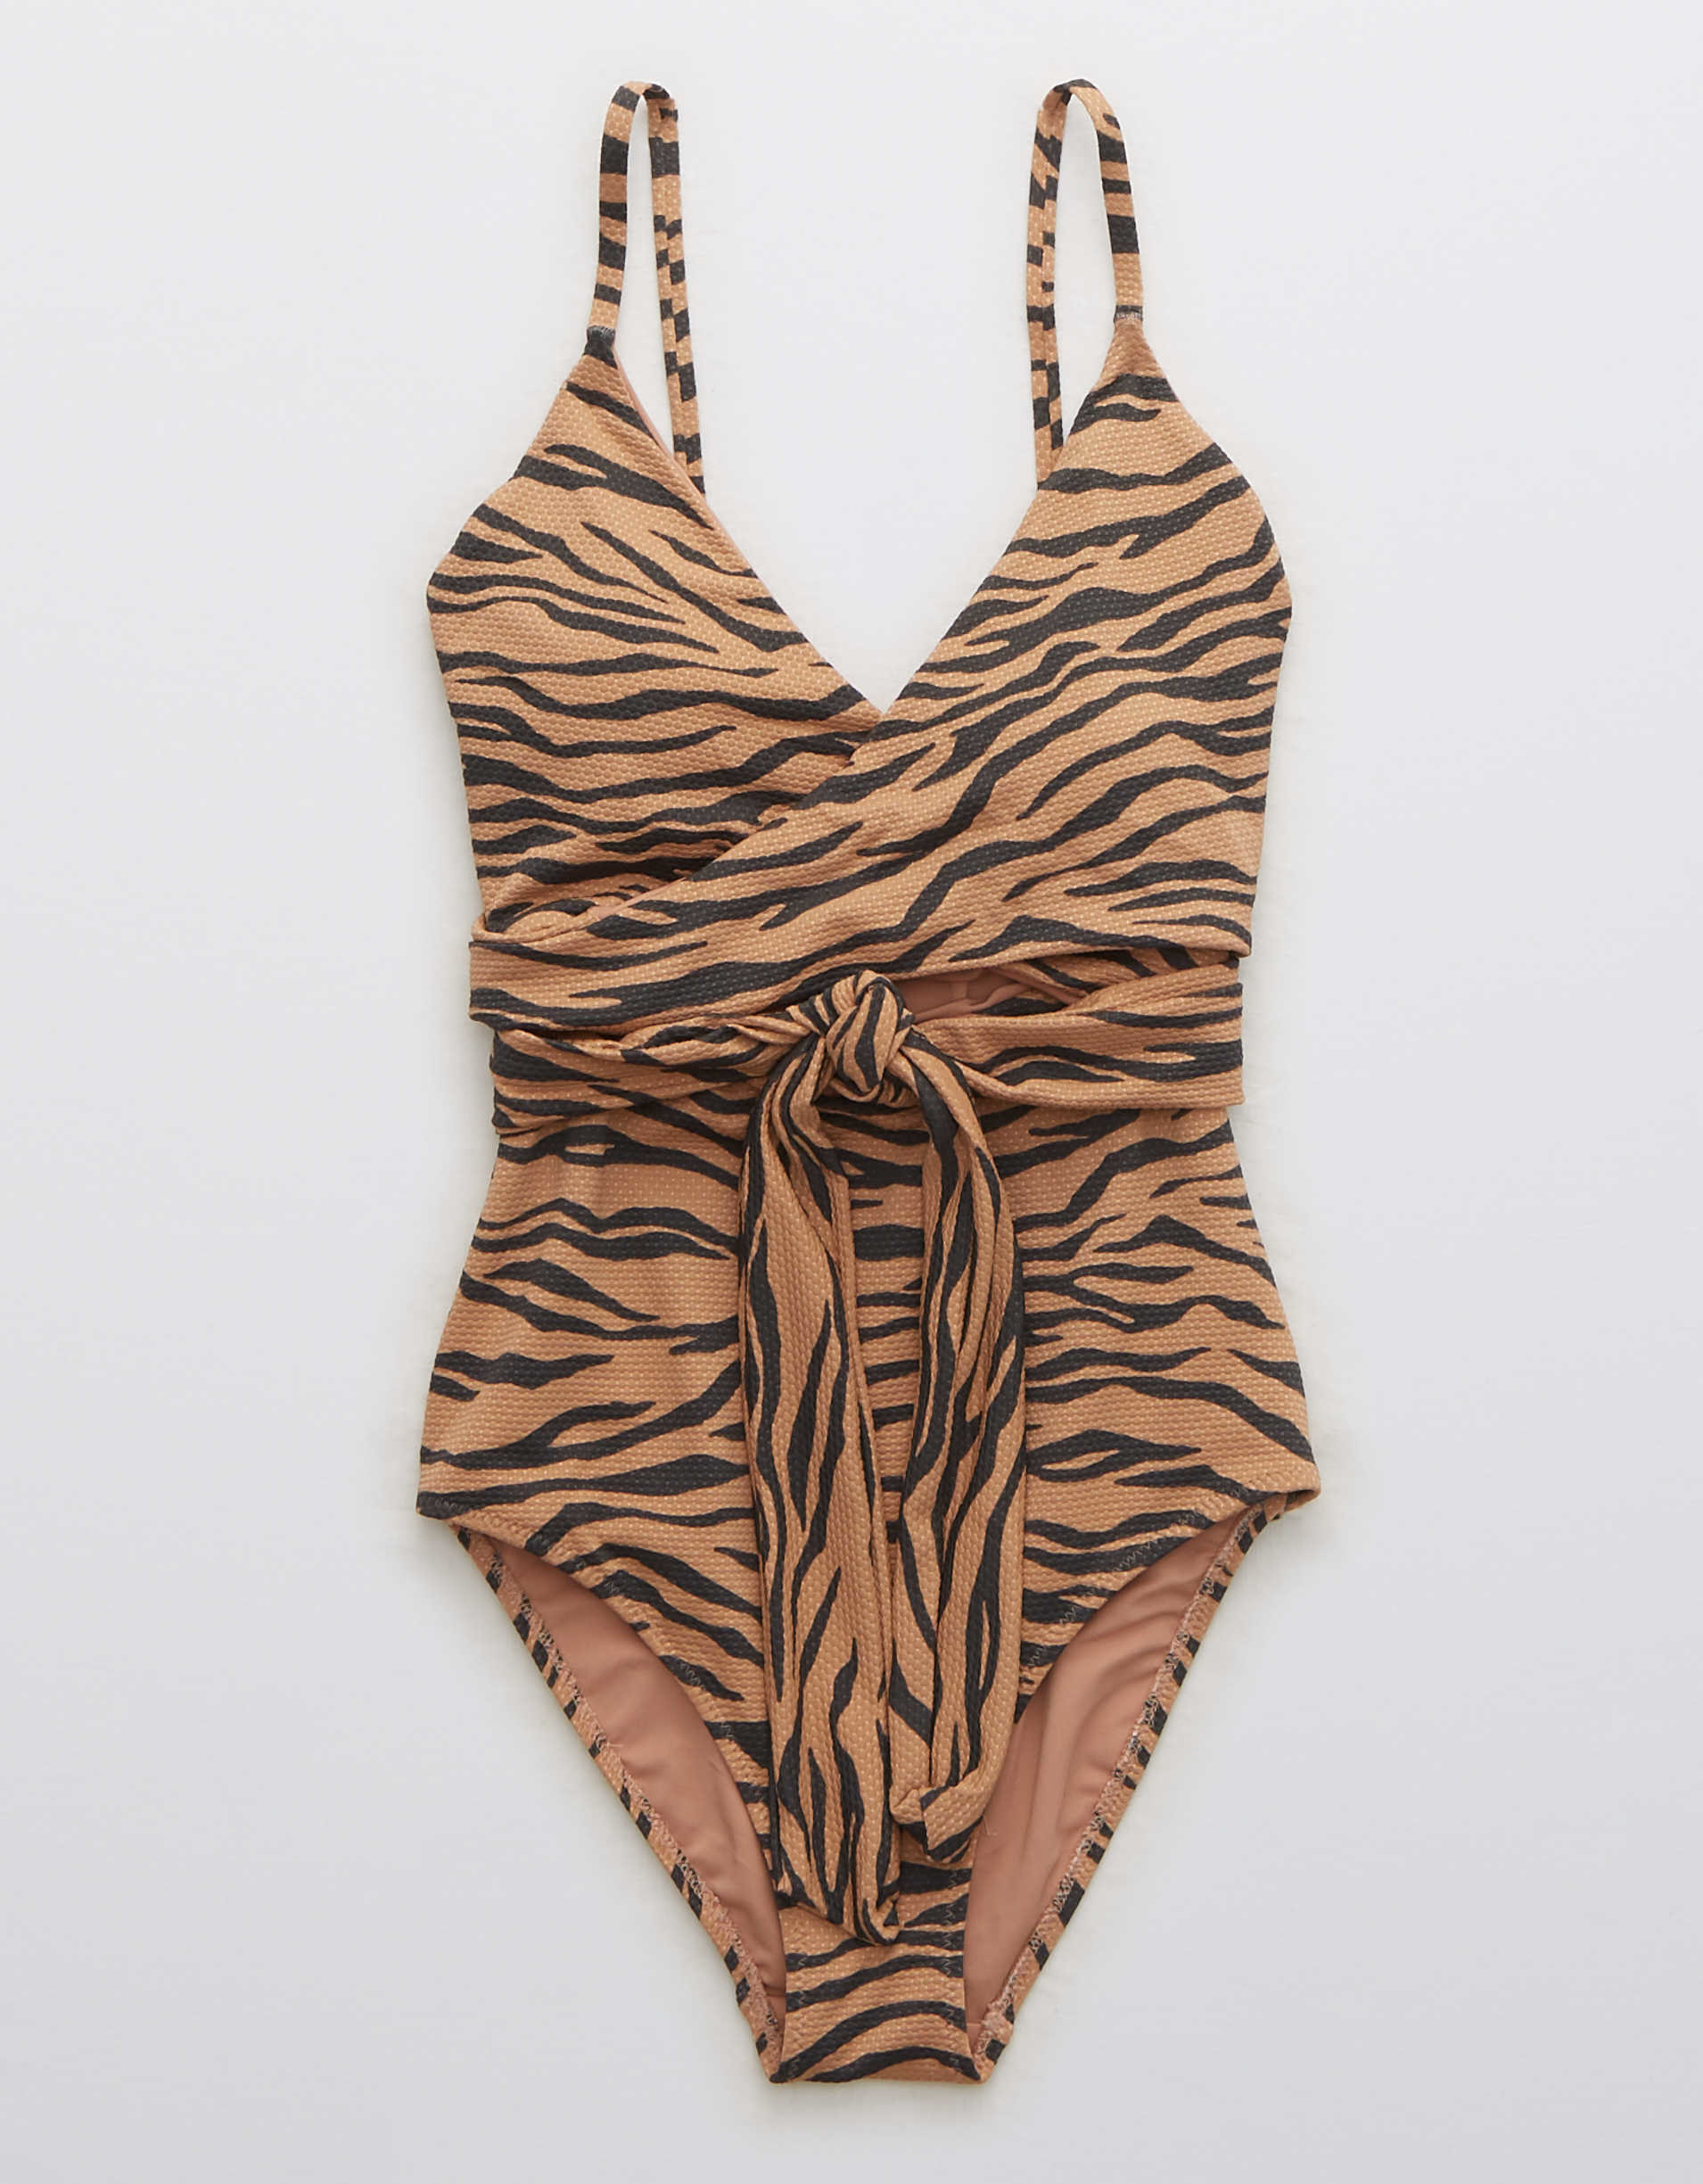 leopard print one-piece swimsuit with spaghetti straps, high cut legs, and a tie around the waist